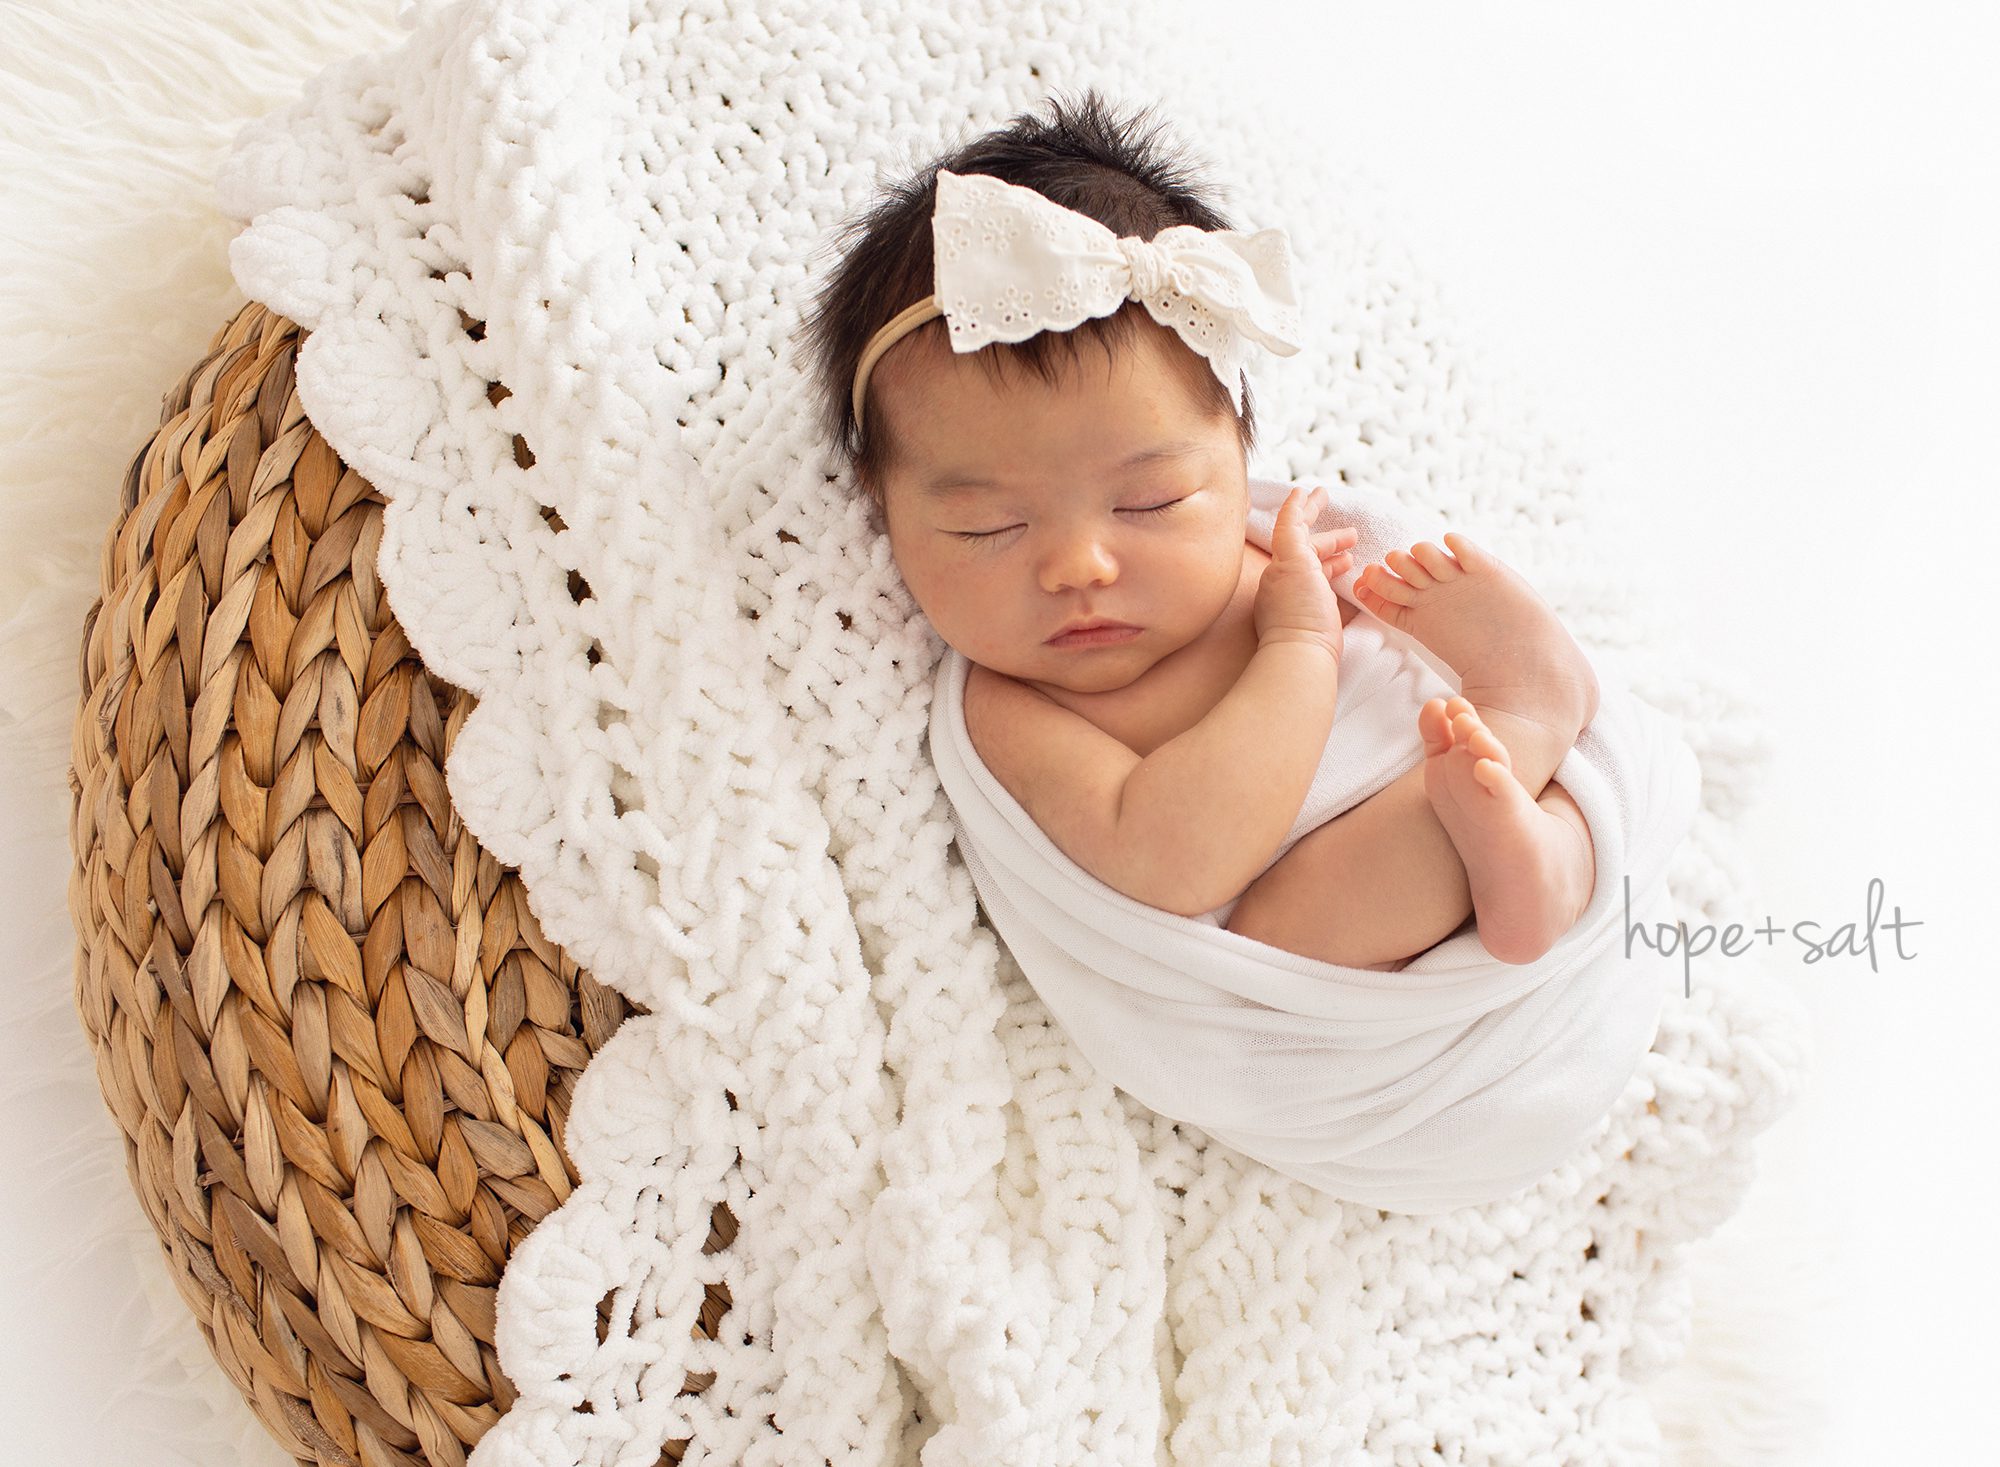 Natural Vintage Boho Studio Newborn Session for baby girl R 2021 by Milton ontario baby photographer hope and salt